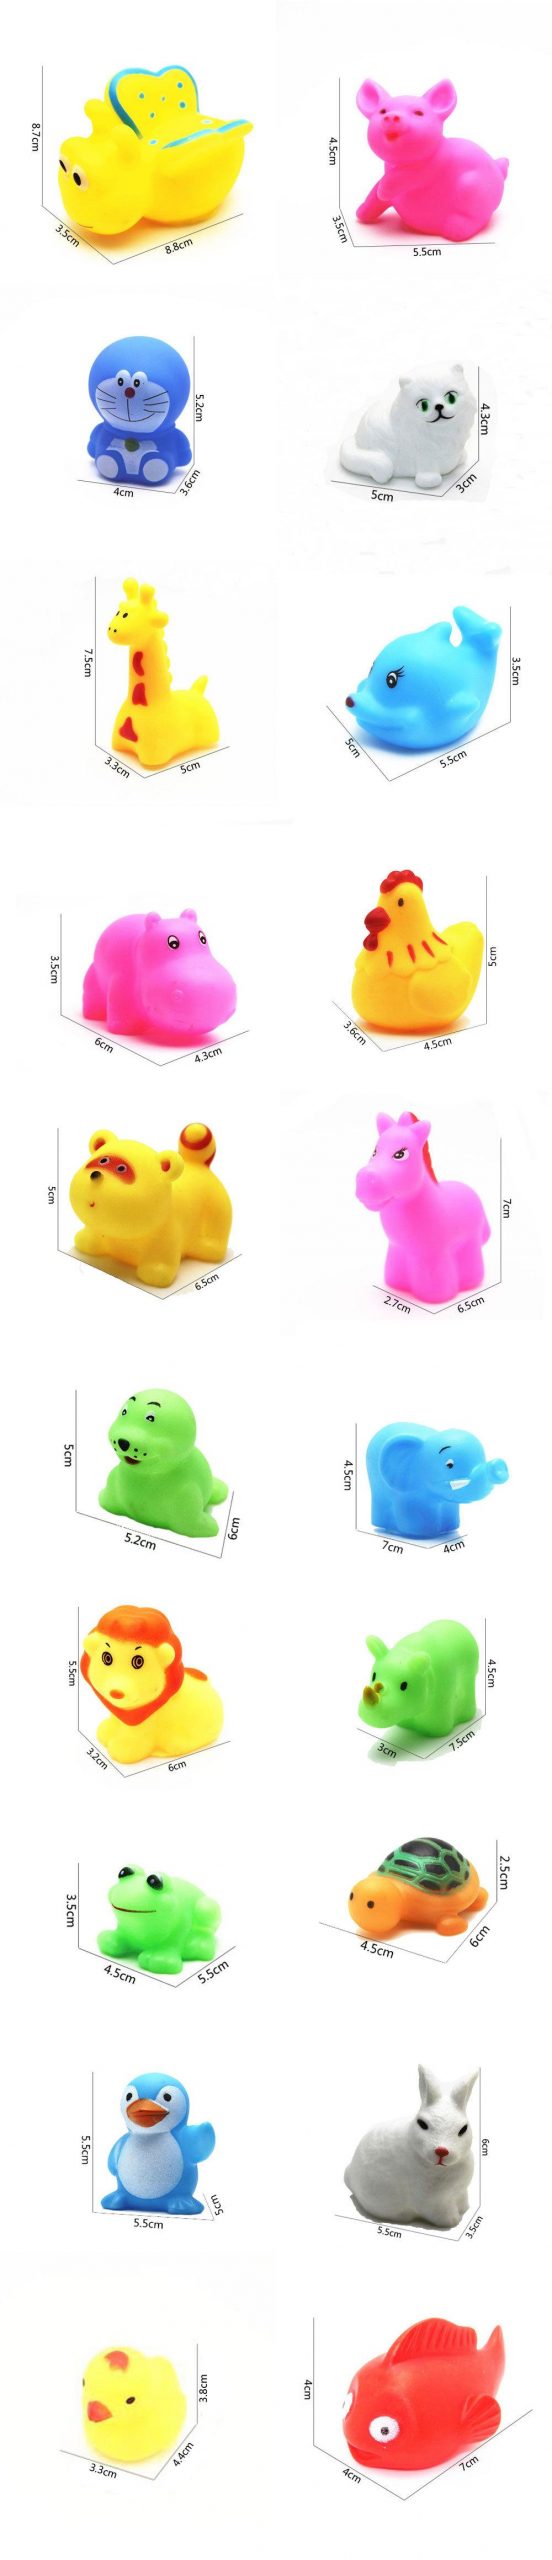 13Pcs Lovely Mixed Animals Colorful Soft Rubber Float Squeeze Sound Squeaky Bathing Toy For Baby GYH